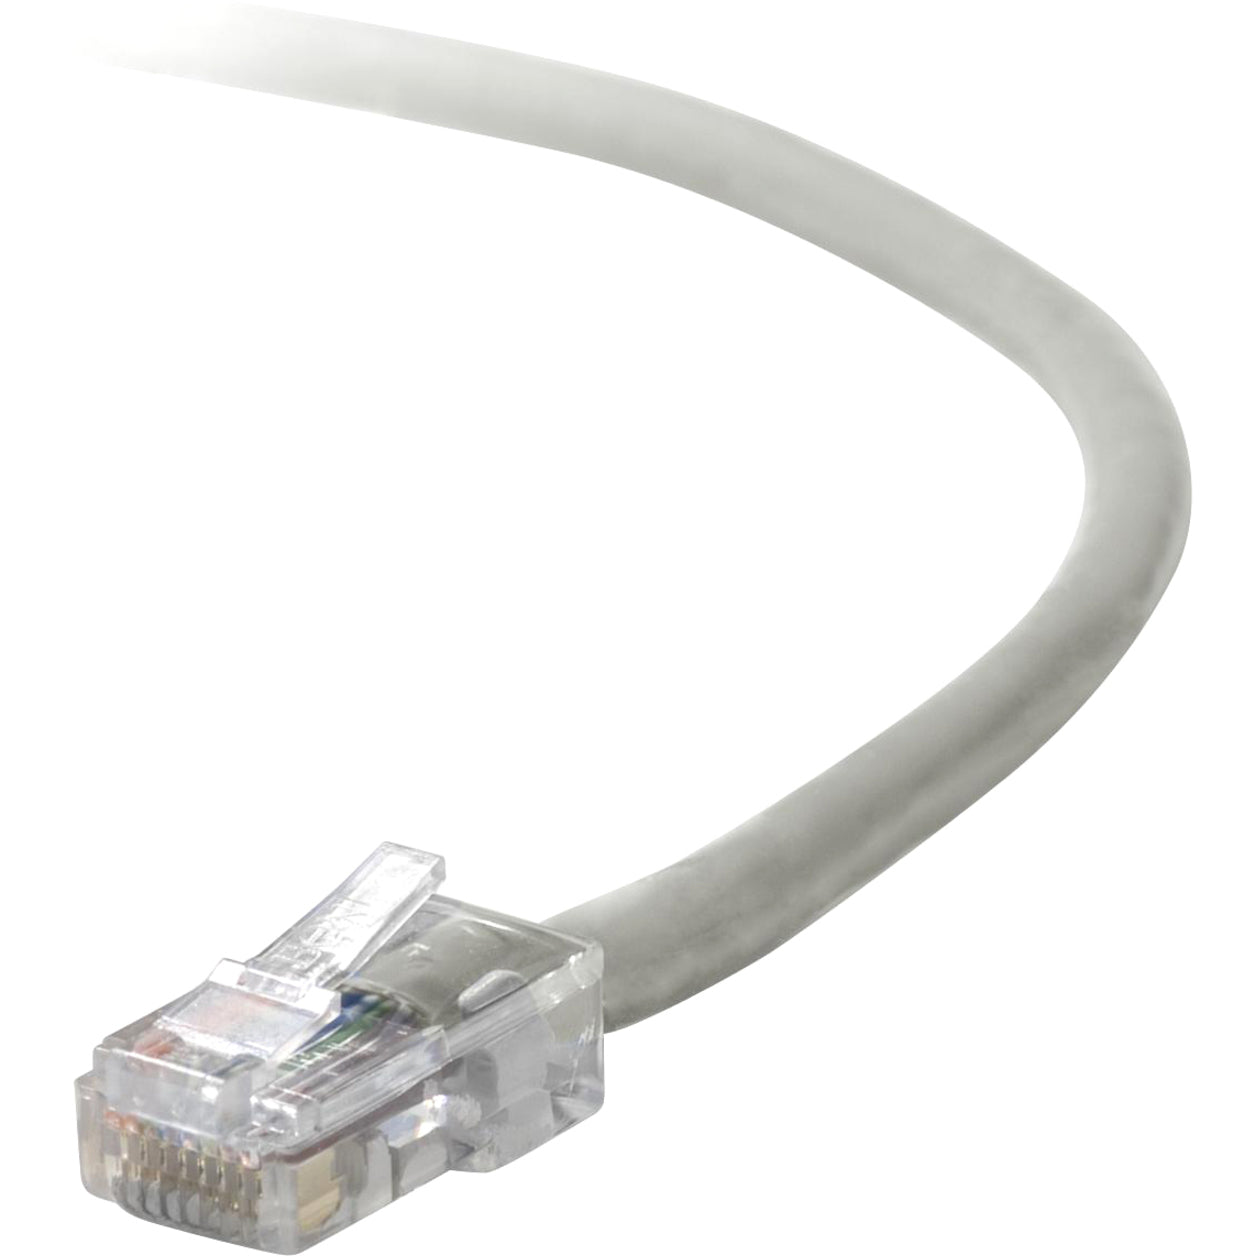 Belkin A3L791B14 RJ45 Category 5e Patch Cable, 14 ft, Copper Conductor